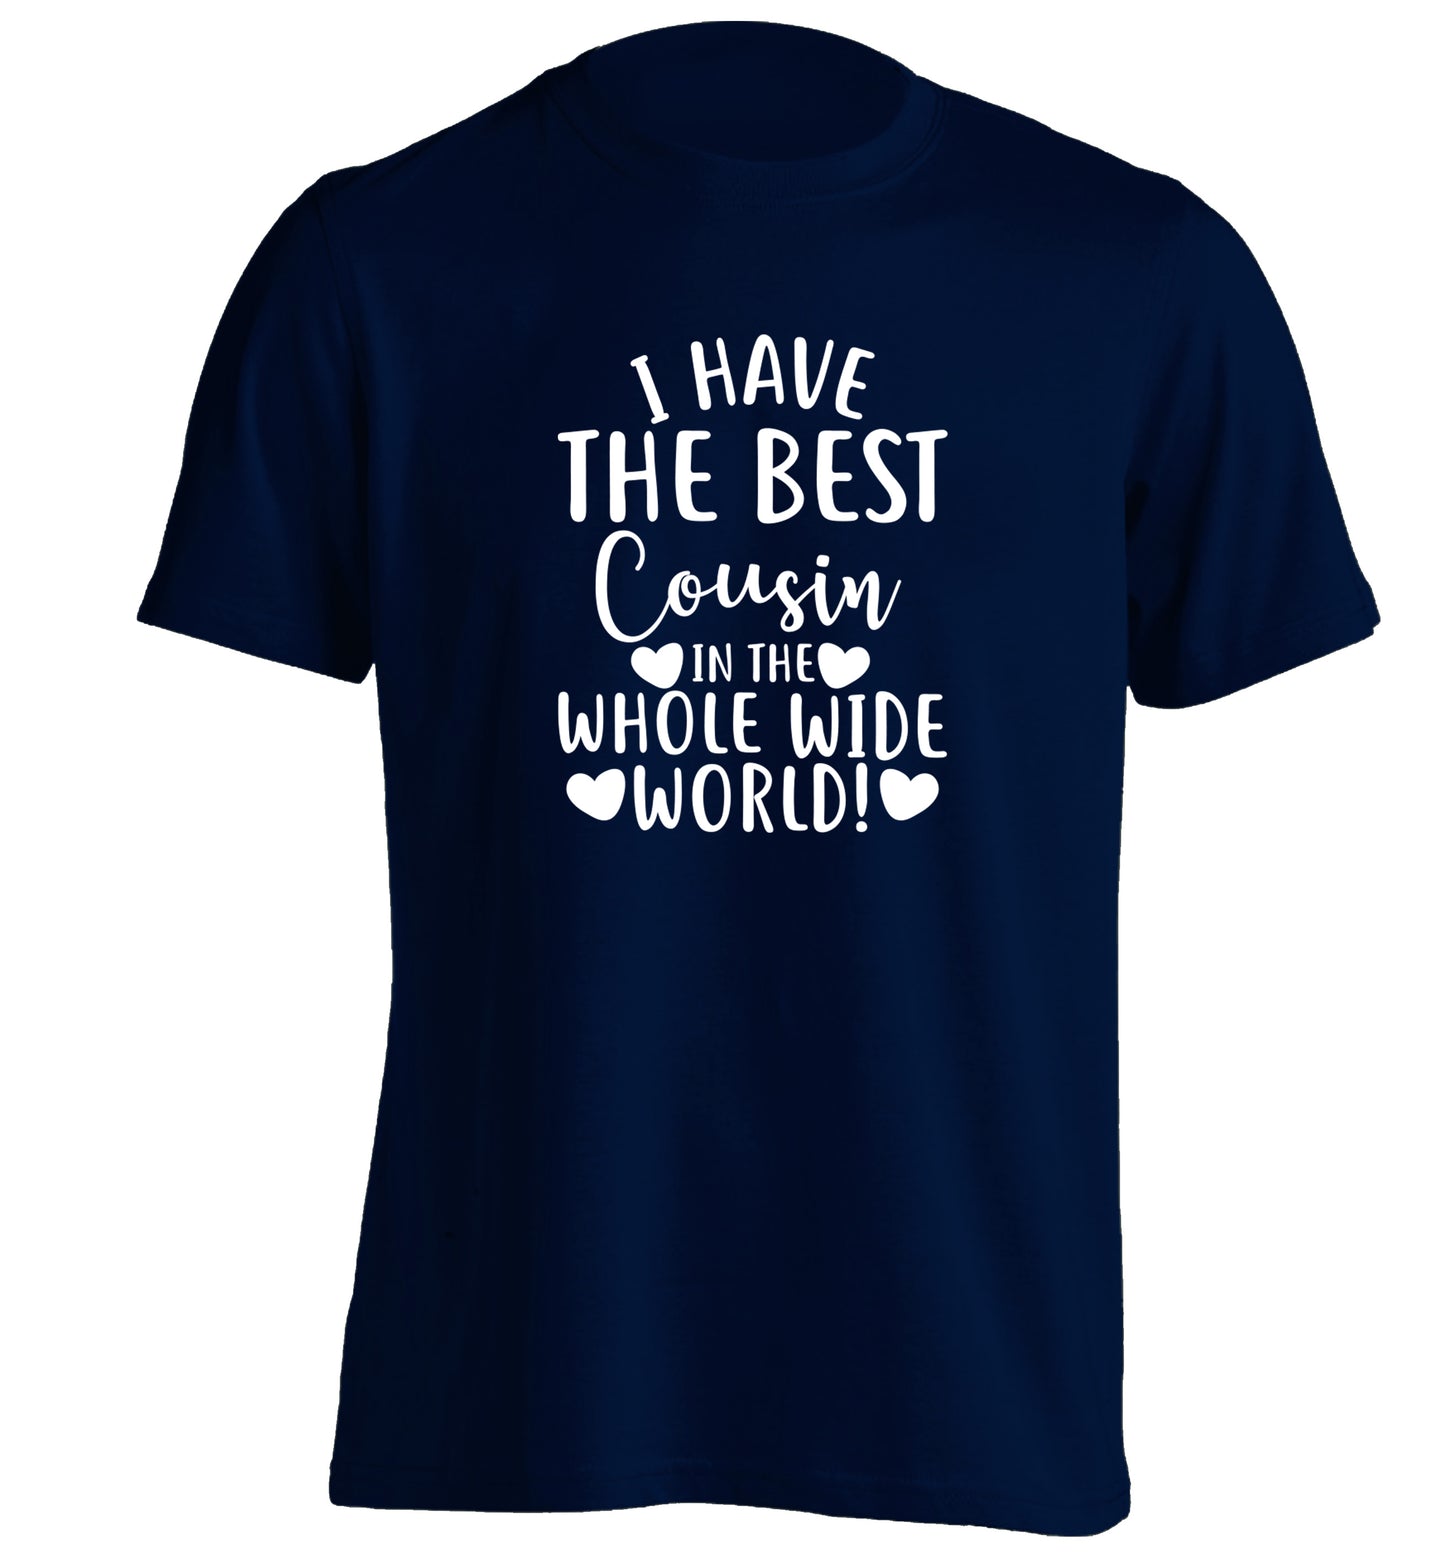 I have the best cousin in the whole wide world! adults unisex navy Tshirt 2XL